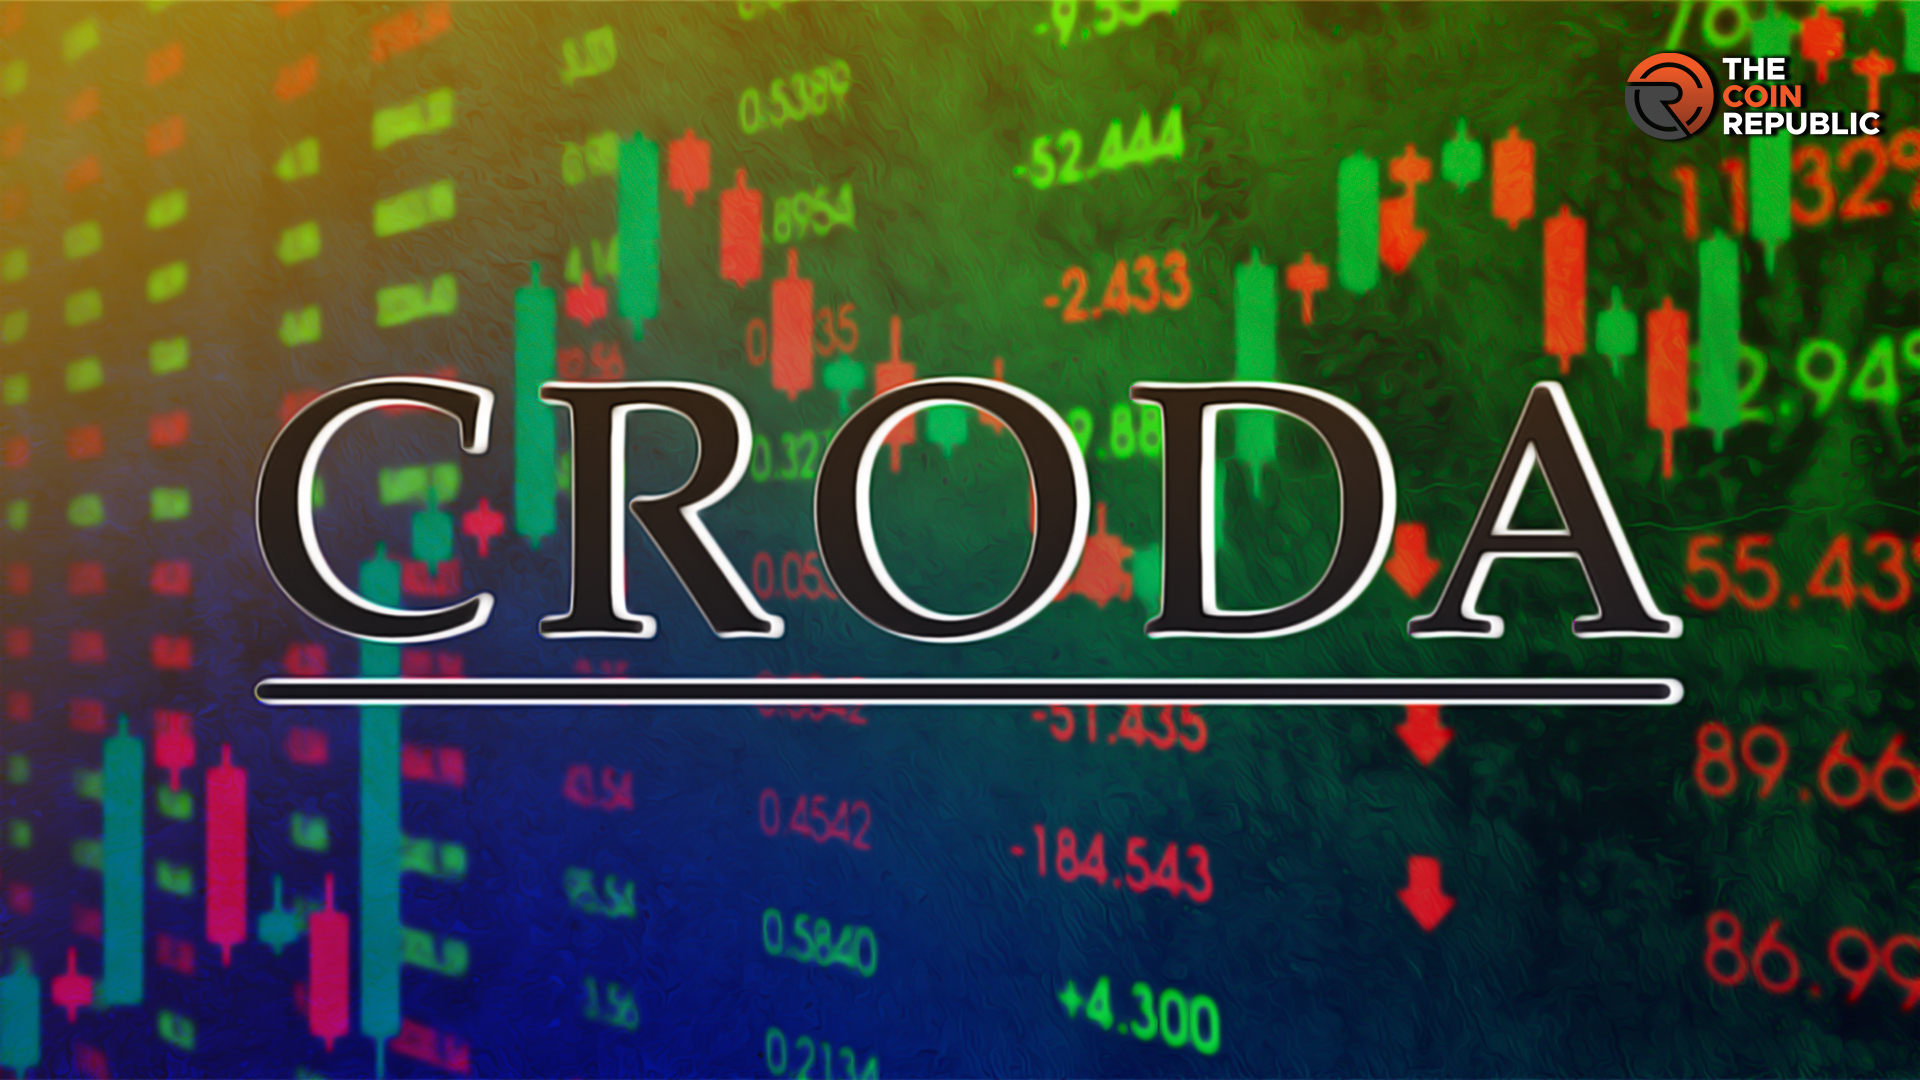 CRDA Stock: Story Behind the Decent Financials & Declining Stock